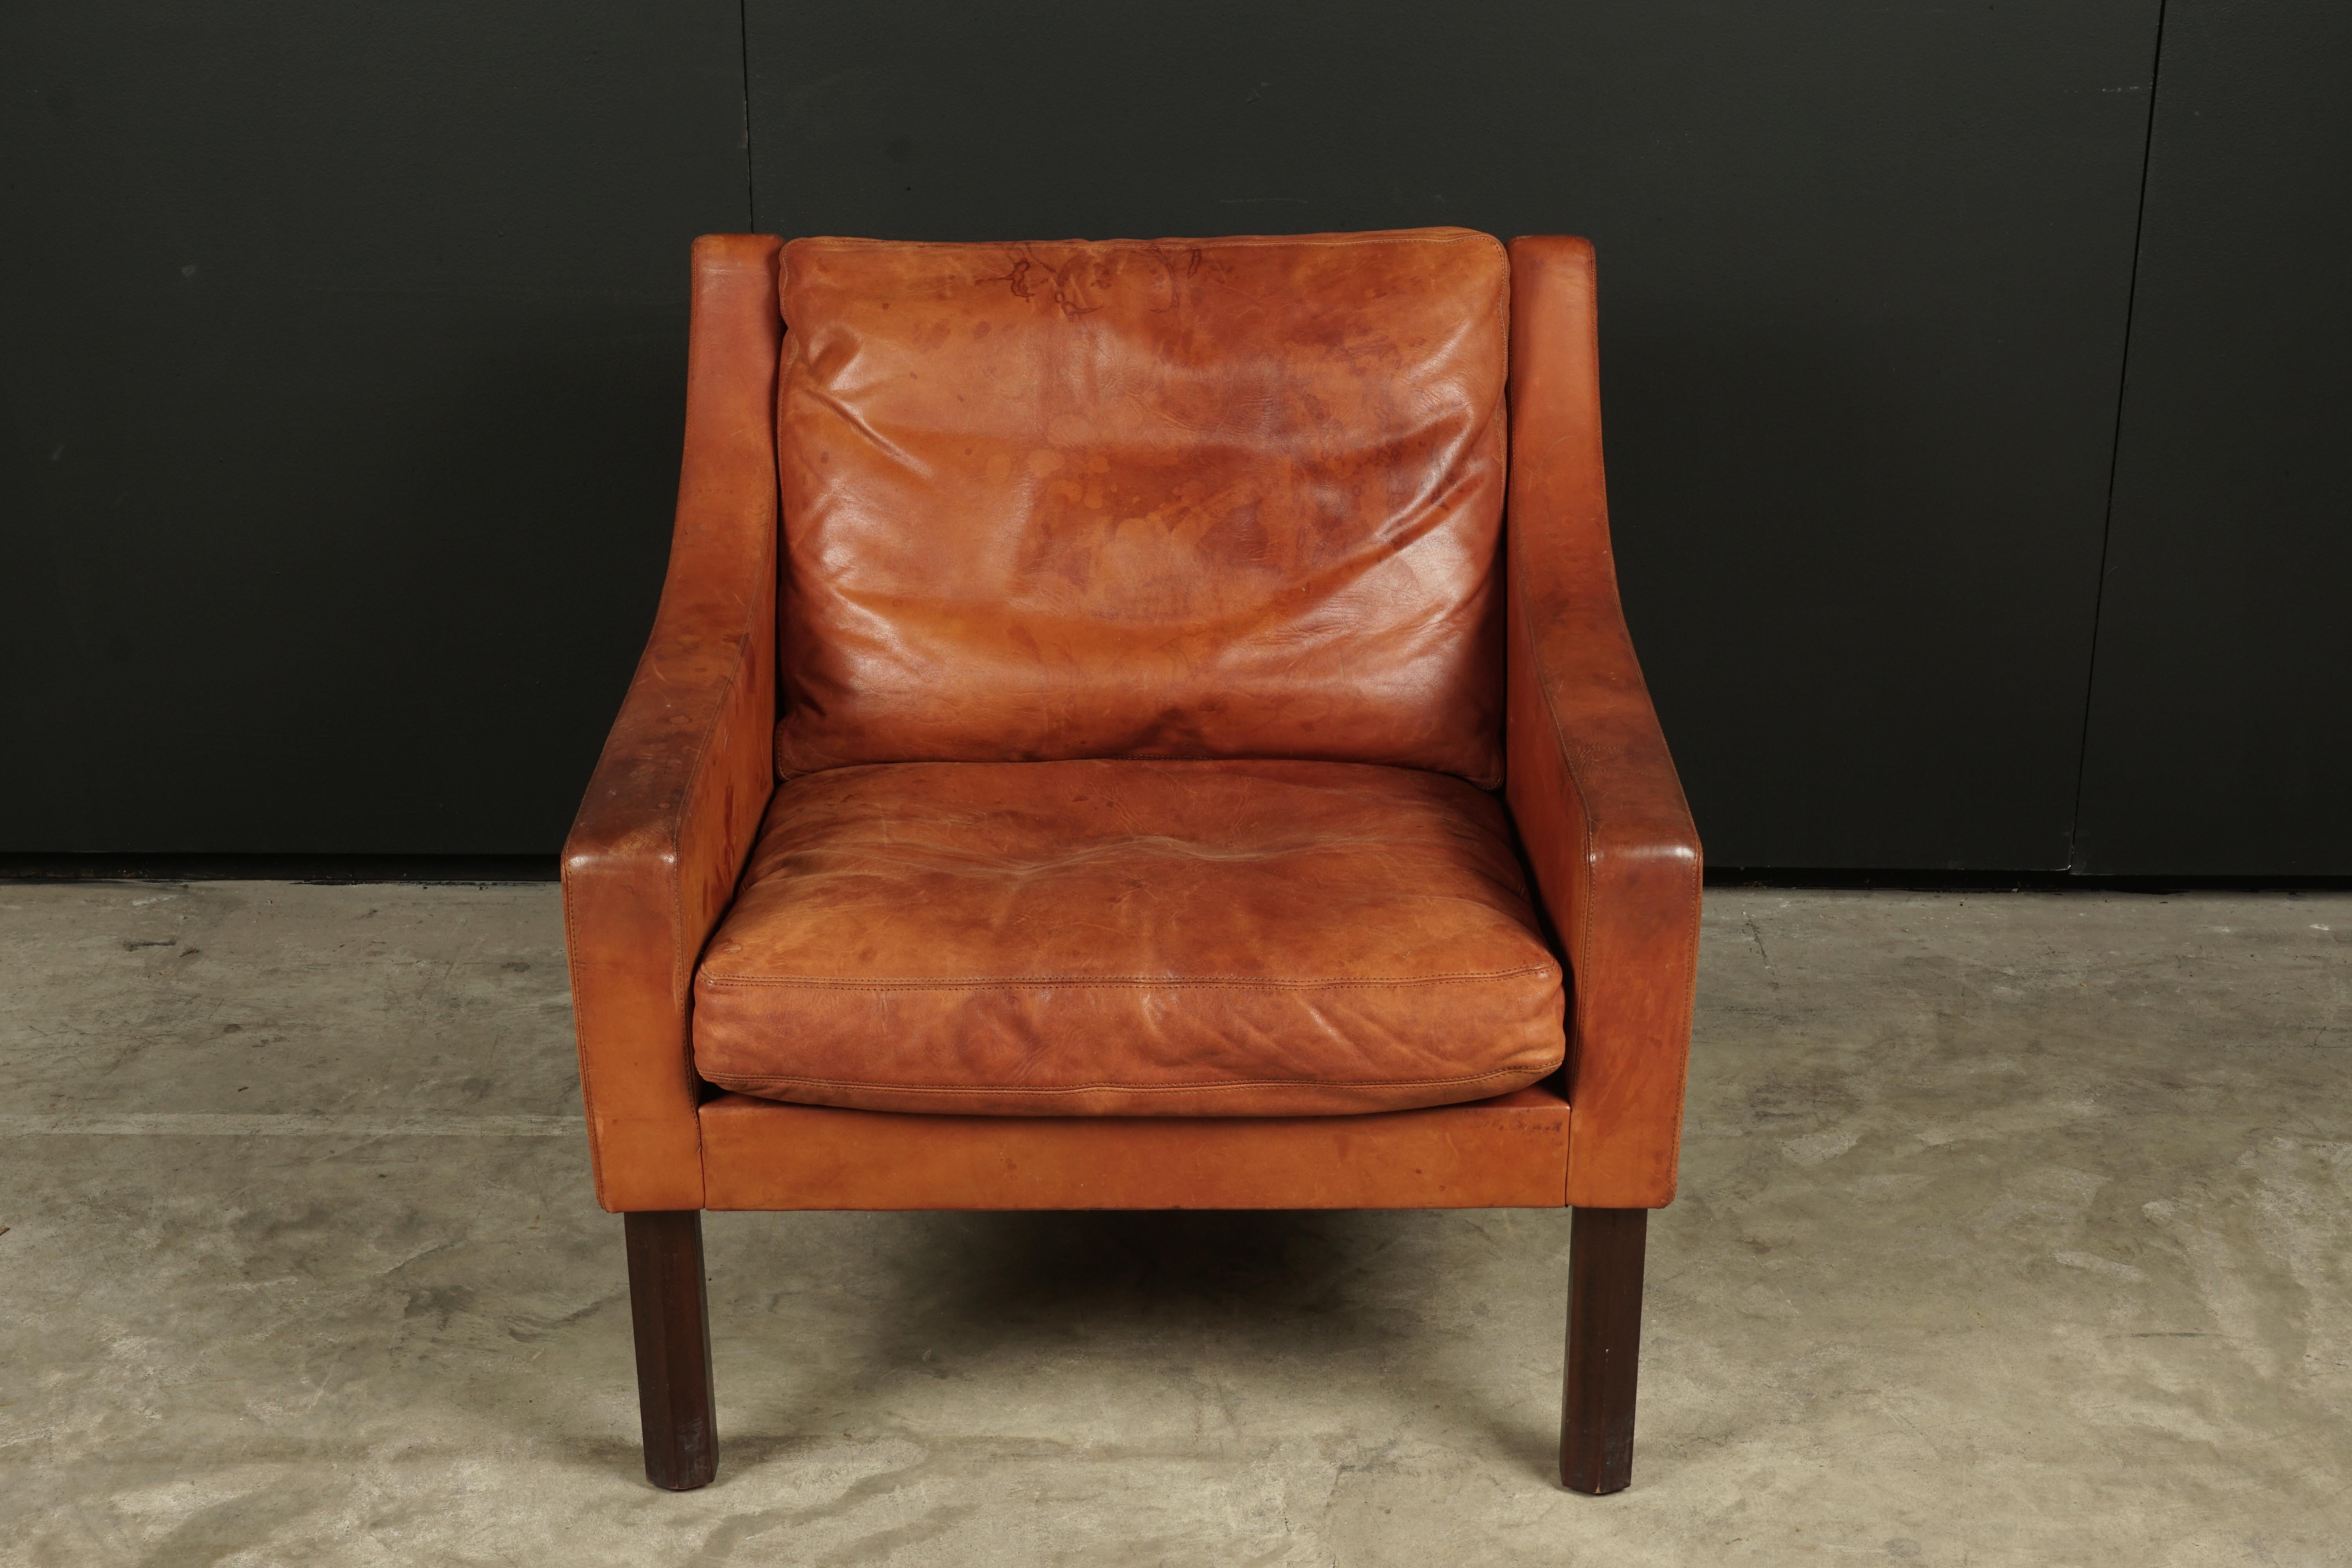 Vintage midcentury leather lounge chair from Denmark, circa 1970. Original cognac leather with great patina and wear.